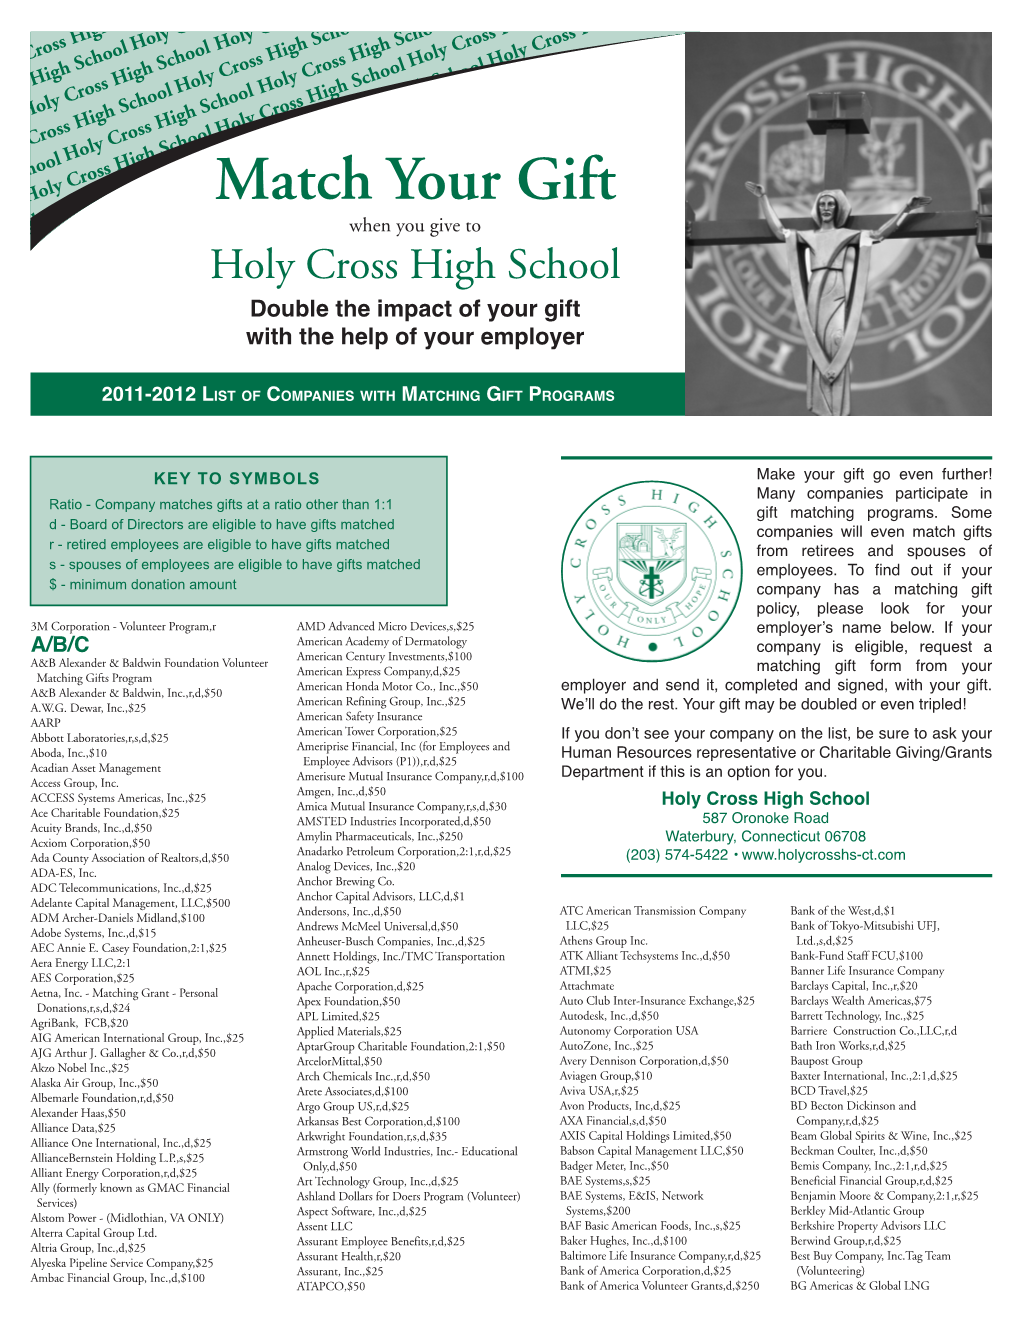 Match Your Gift When You Give to Holy Cross High School Double the Impact of Your Gift with the Help of Your Employer